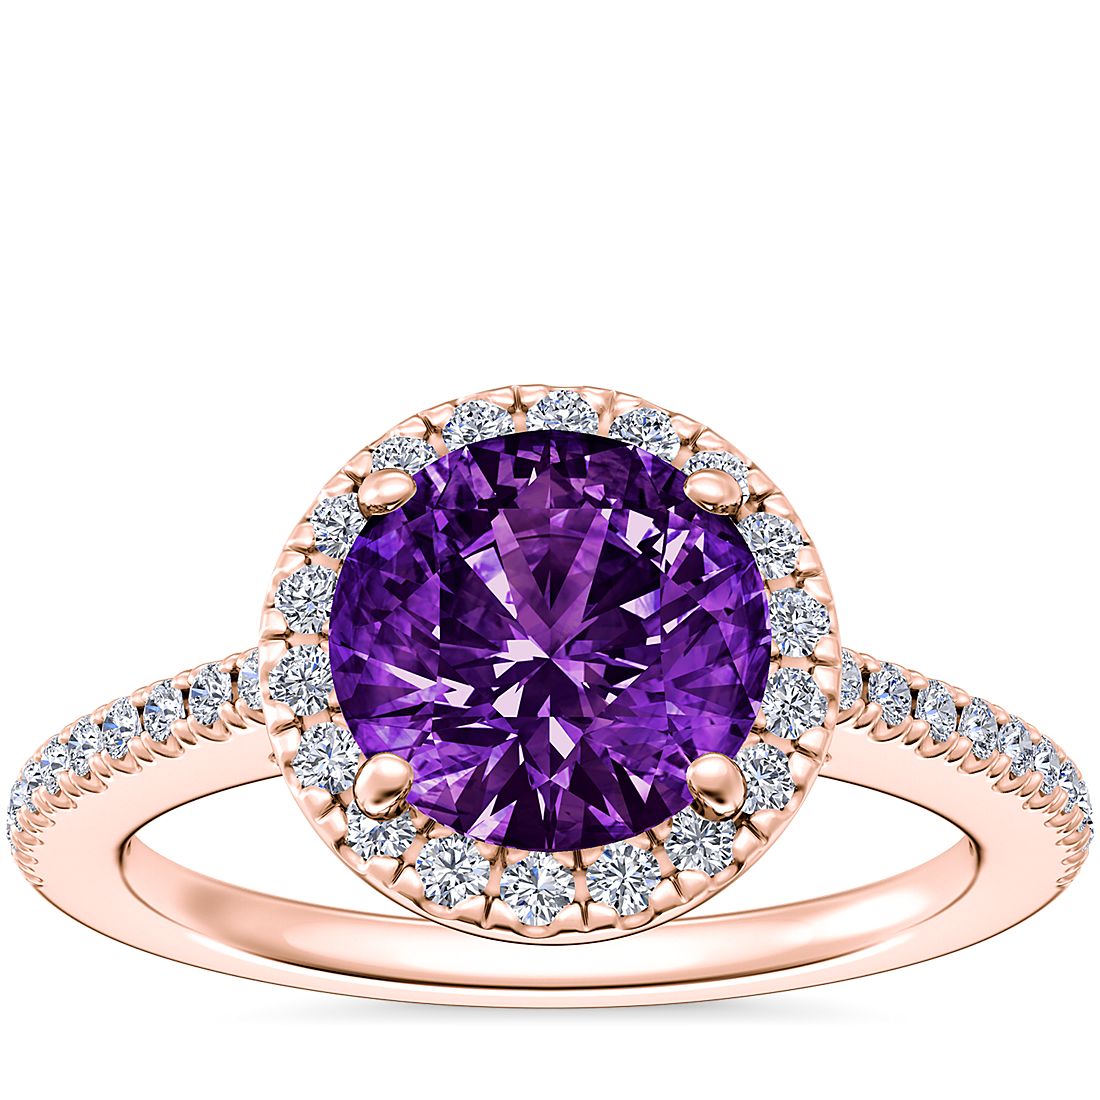 Classic Halo Diamond Engagement Ring with Round Amethyst in 14k Rose Gold (8mm)